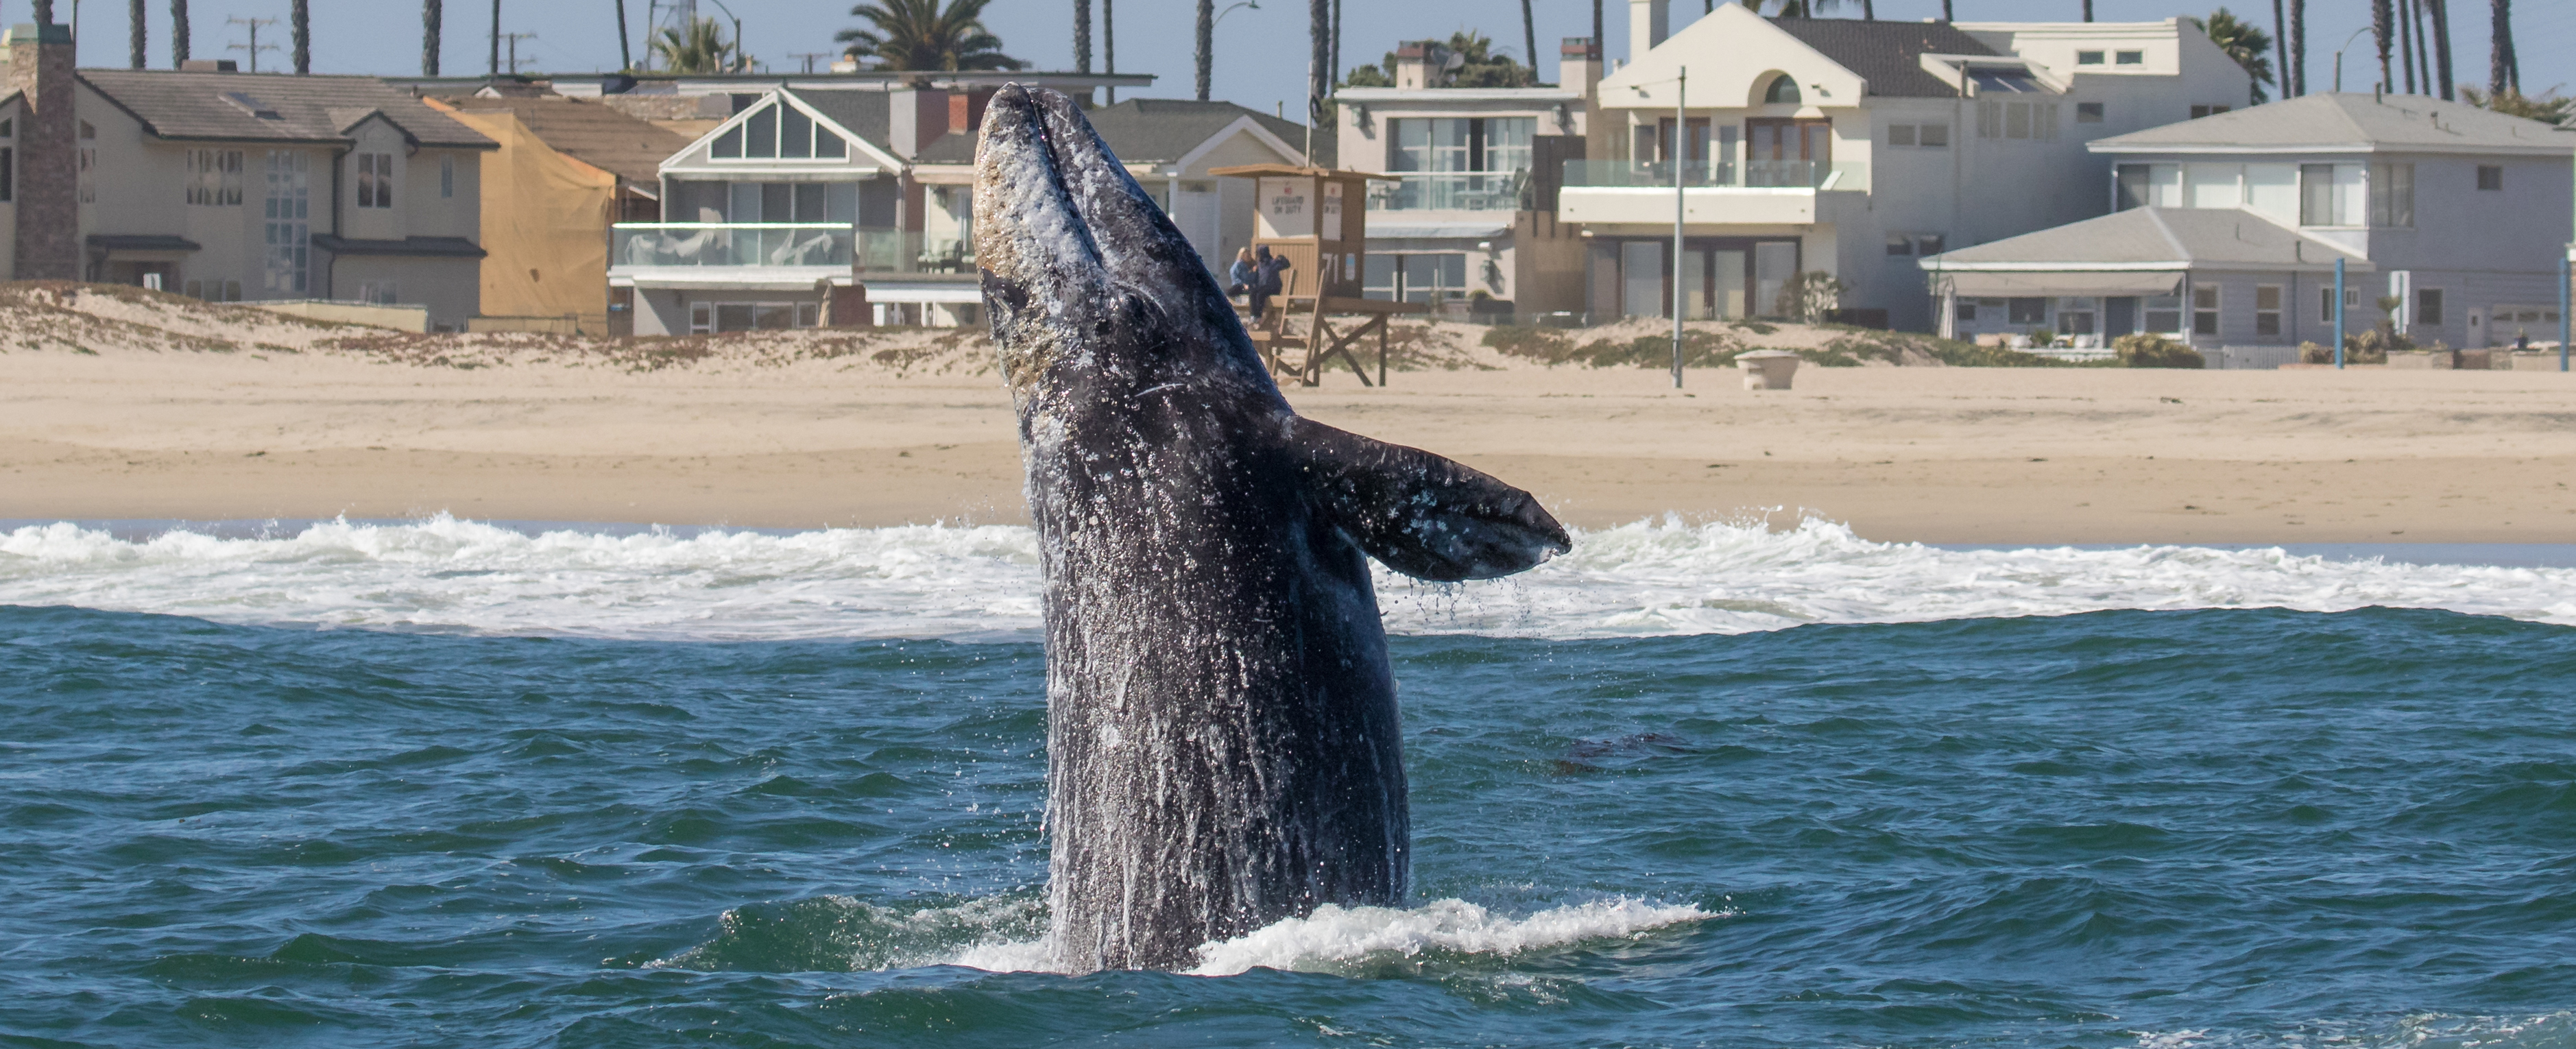 Southern-California-gray-whales